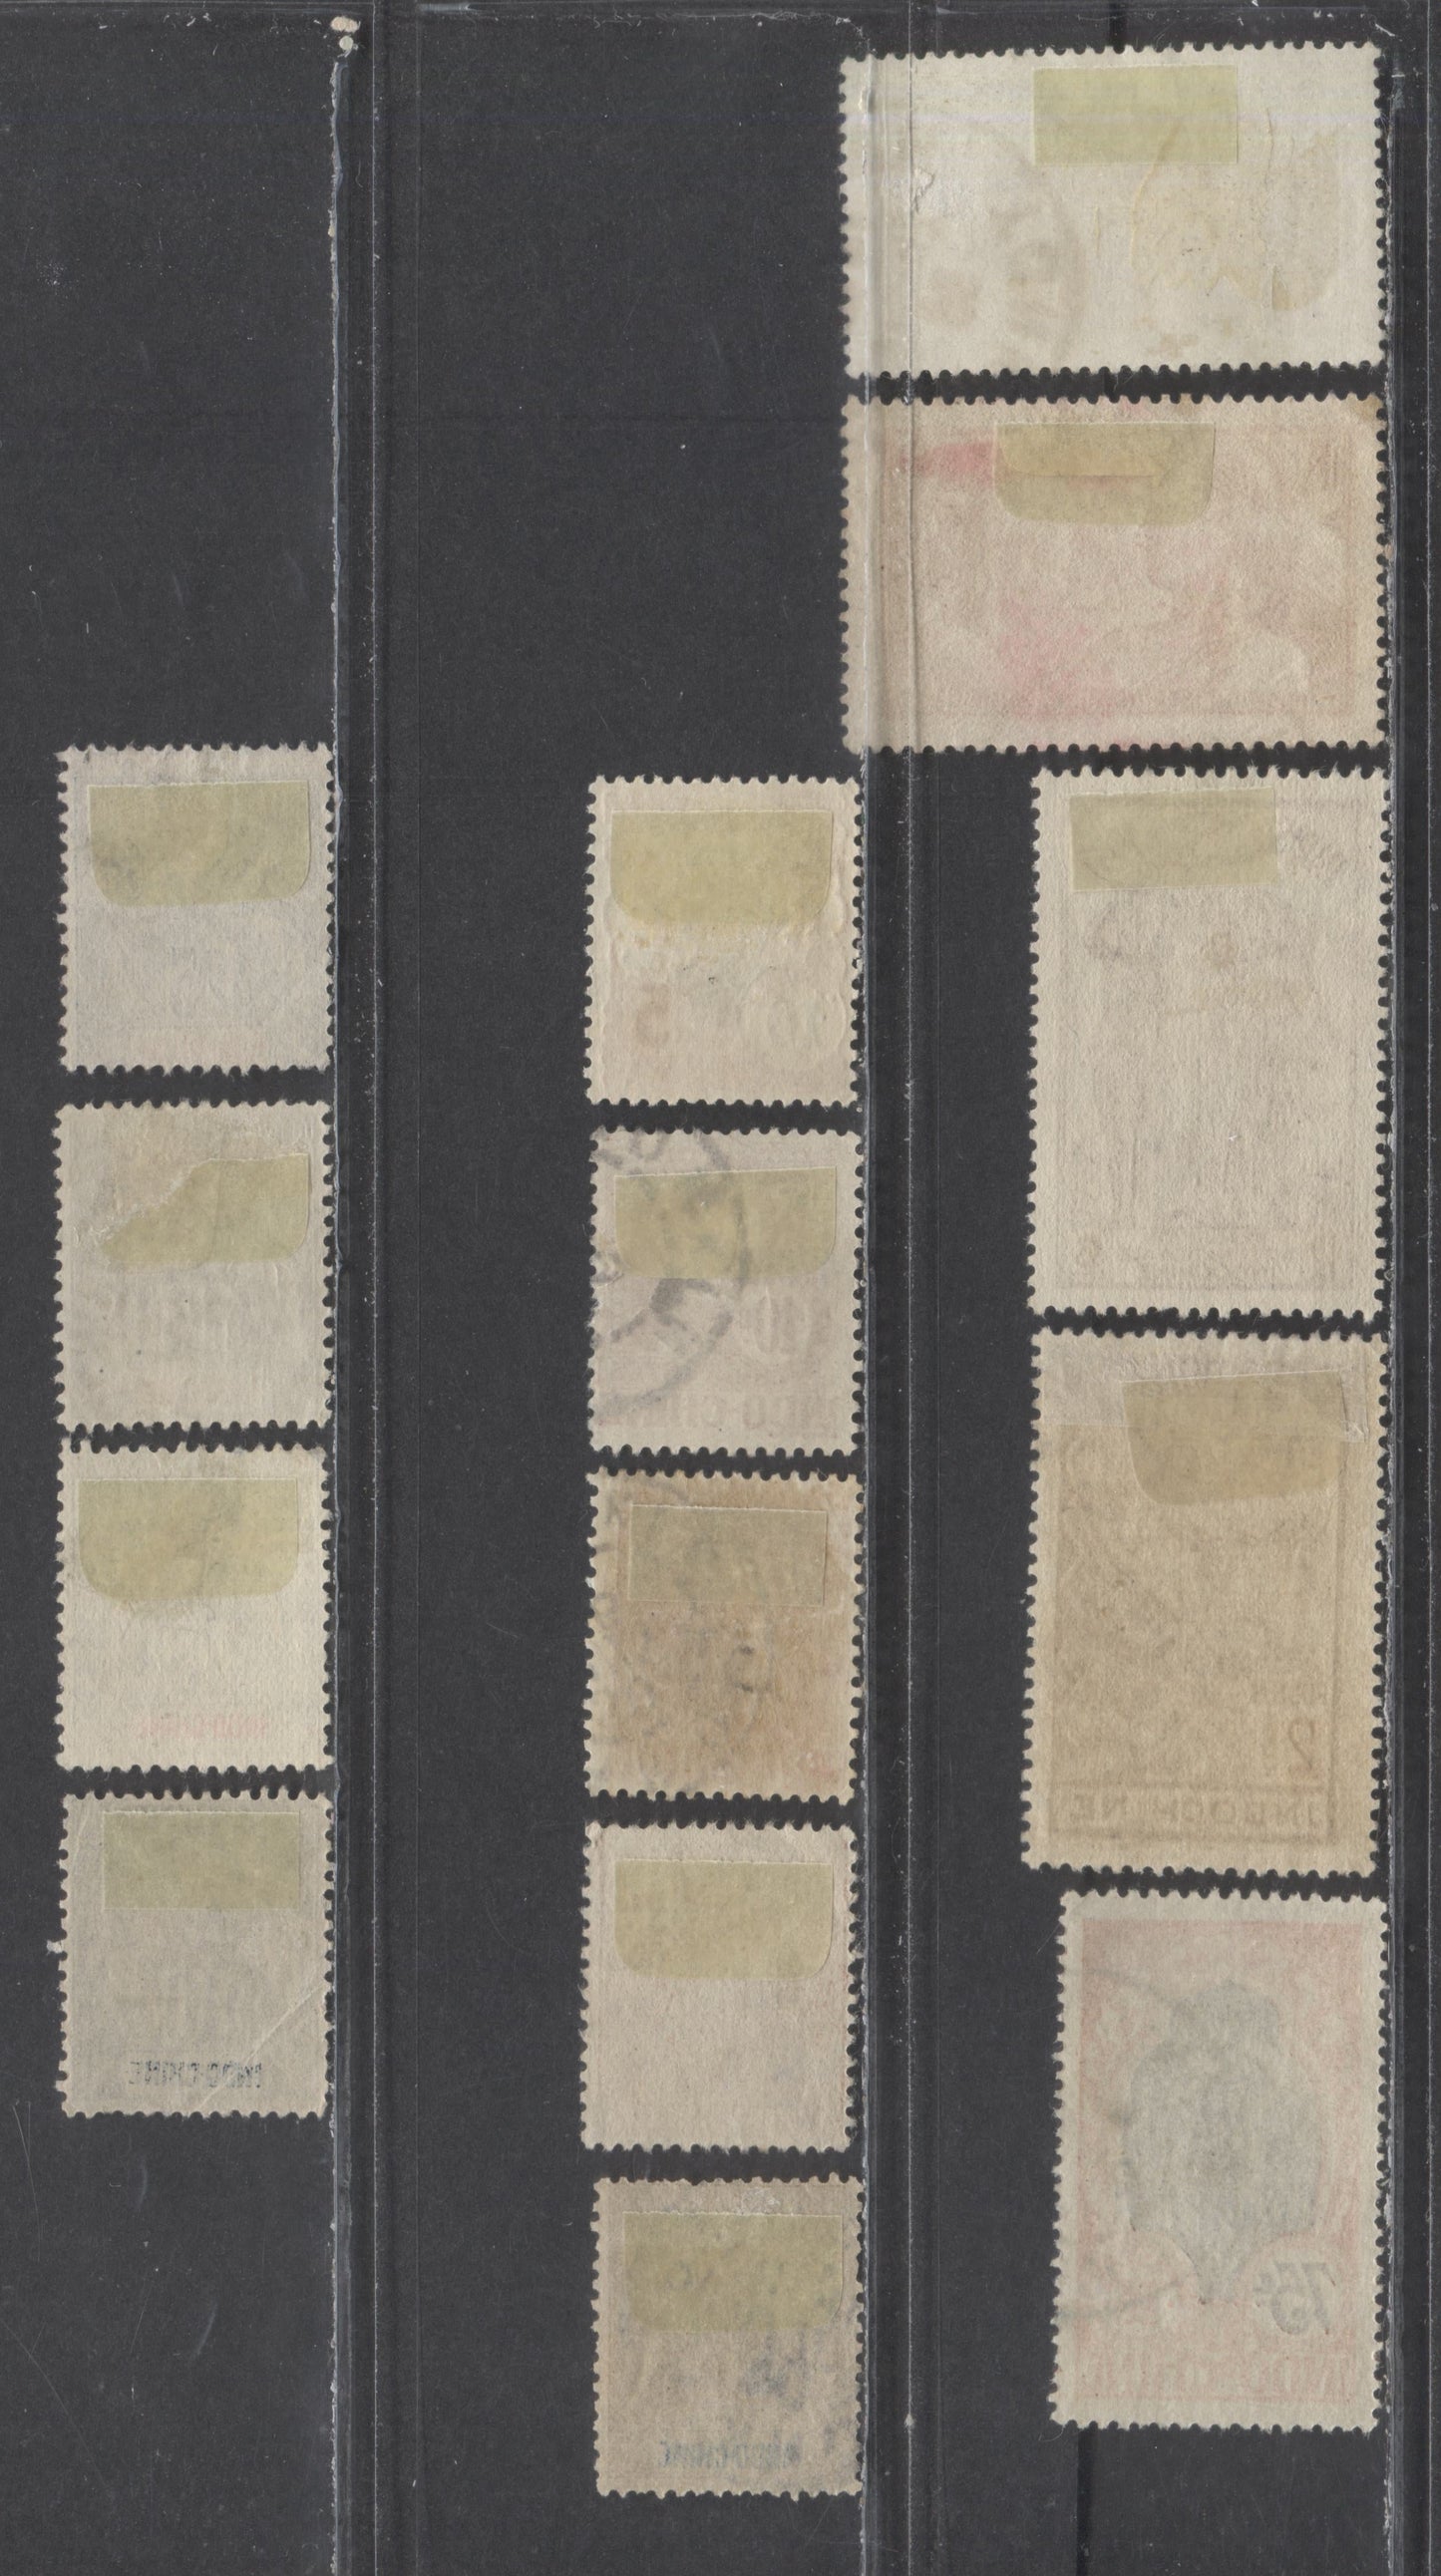 Lot 368 Indo-China SC#8/J21 1892-1938 Definitives, Semi Postals & Postage Dues, 14 Fine/Very Fine Used Singles, Click on Listing to See ALL Pictures, 2022 Scott Classic Cat. $32.55 USD